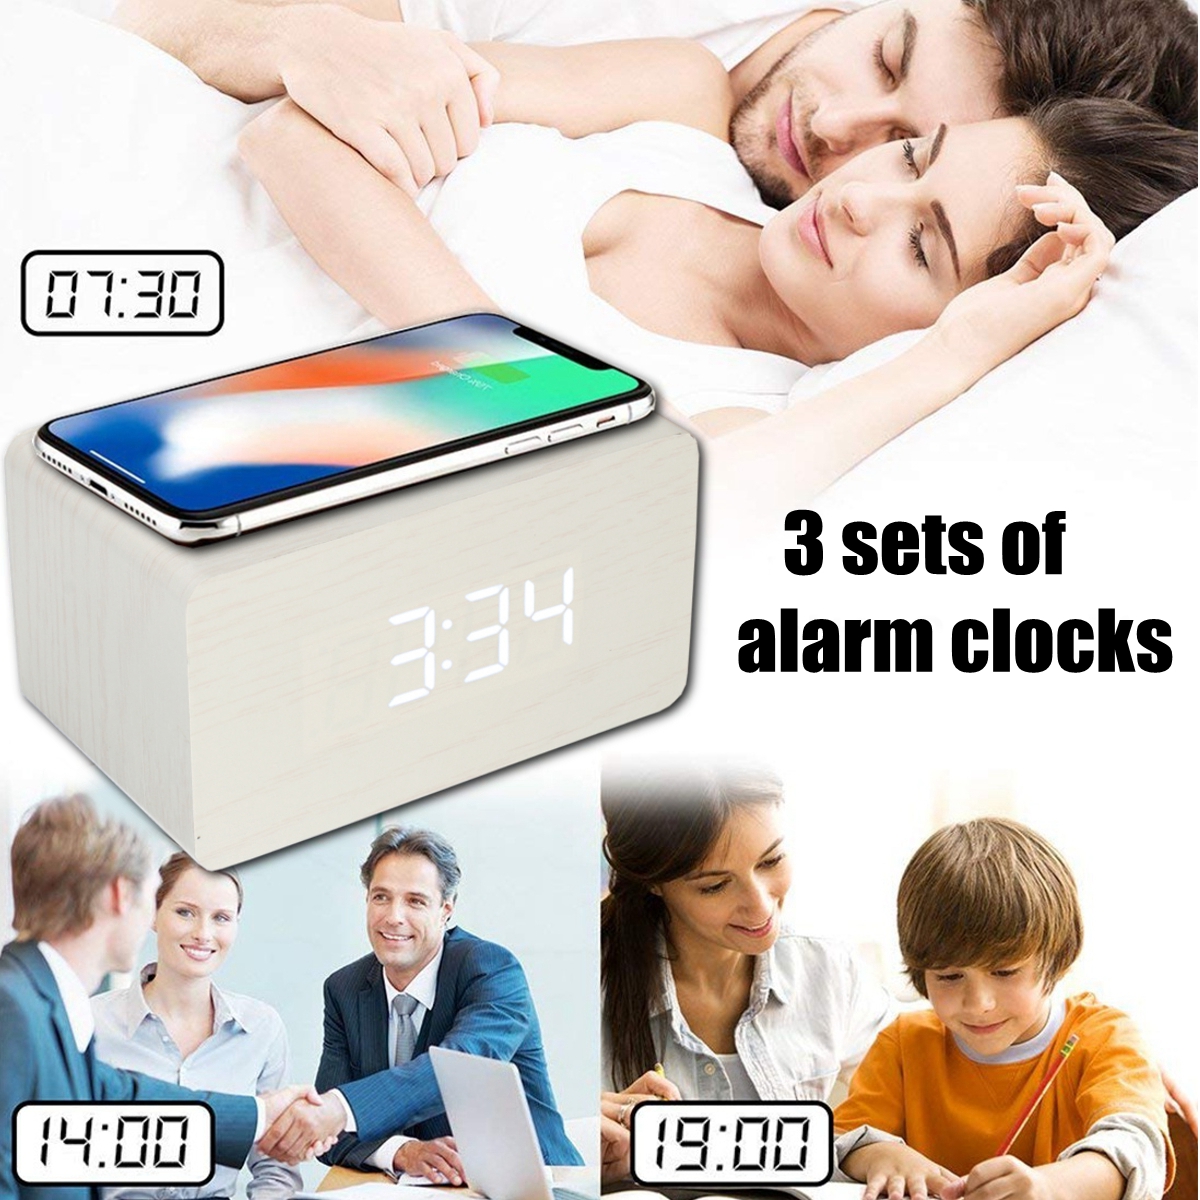 Digital-Thermometer-LED-Desk-Alarm-Clock-With--Wireless-Charger-For-Phone-1587803-4